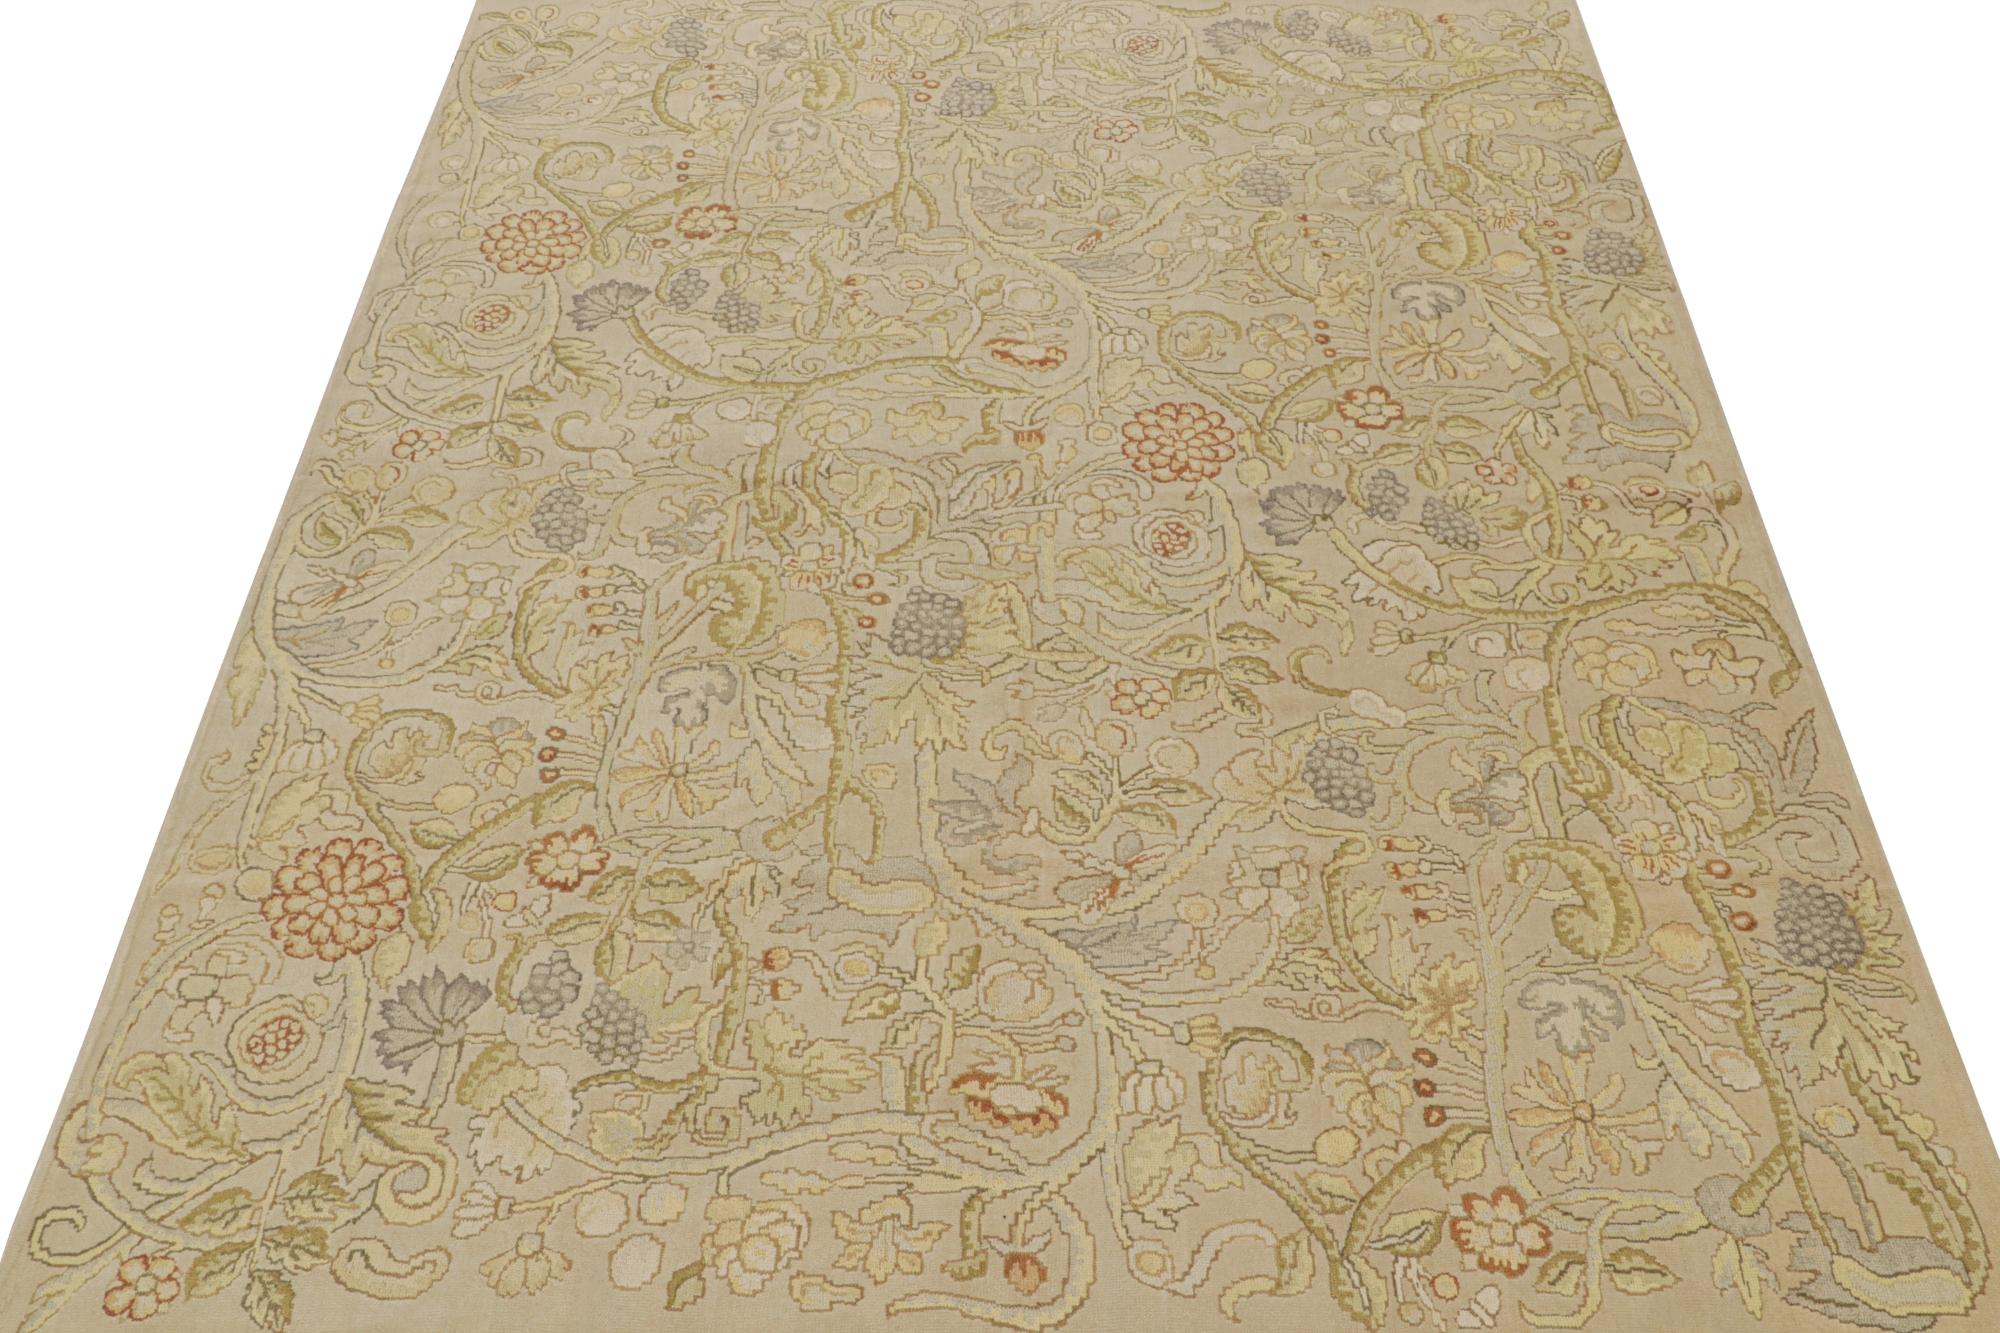 Rug & Kilim’s English Tudor Style Flatweave in Beige with Floral Patterns In New Condition For Sale In Long Island City, NY